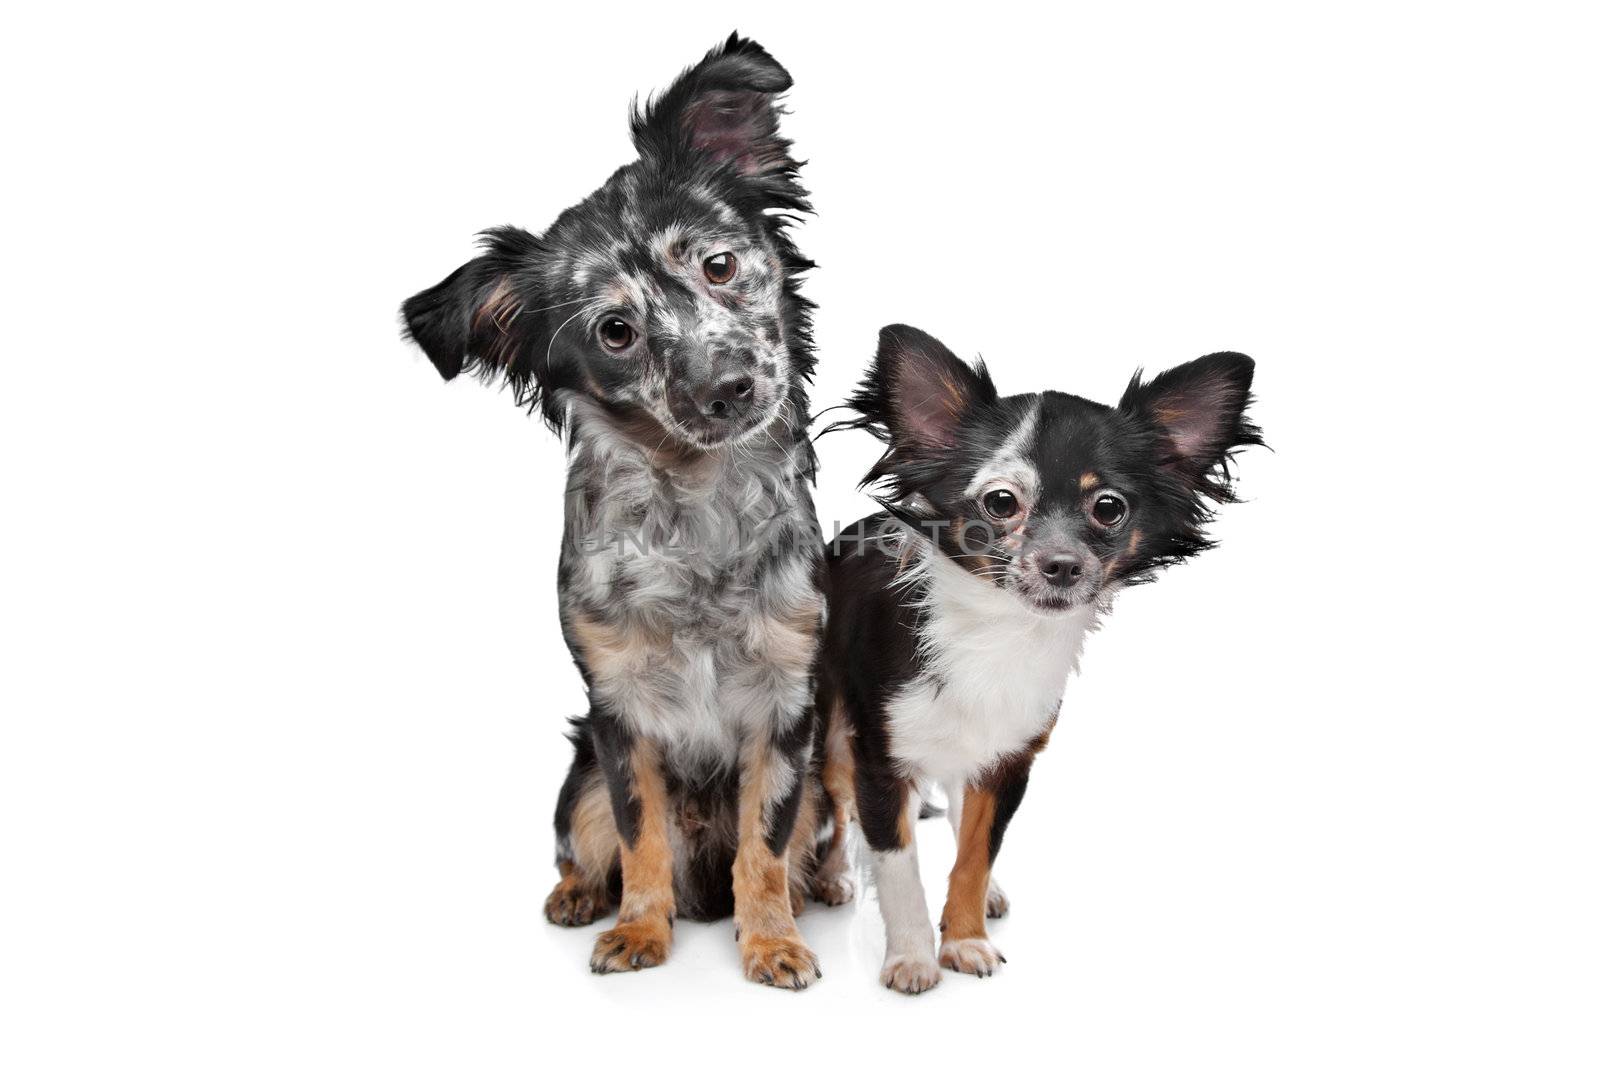 Two Chihuahua dogs in front of a white background